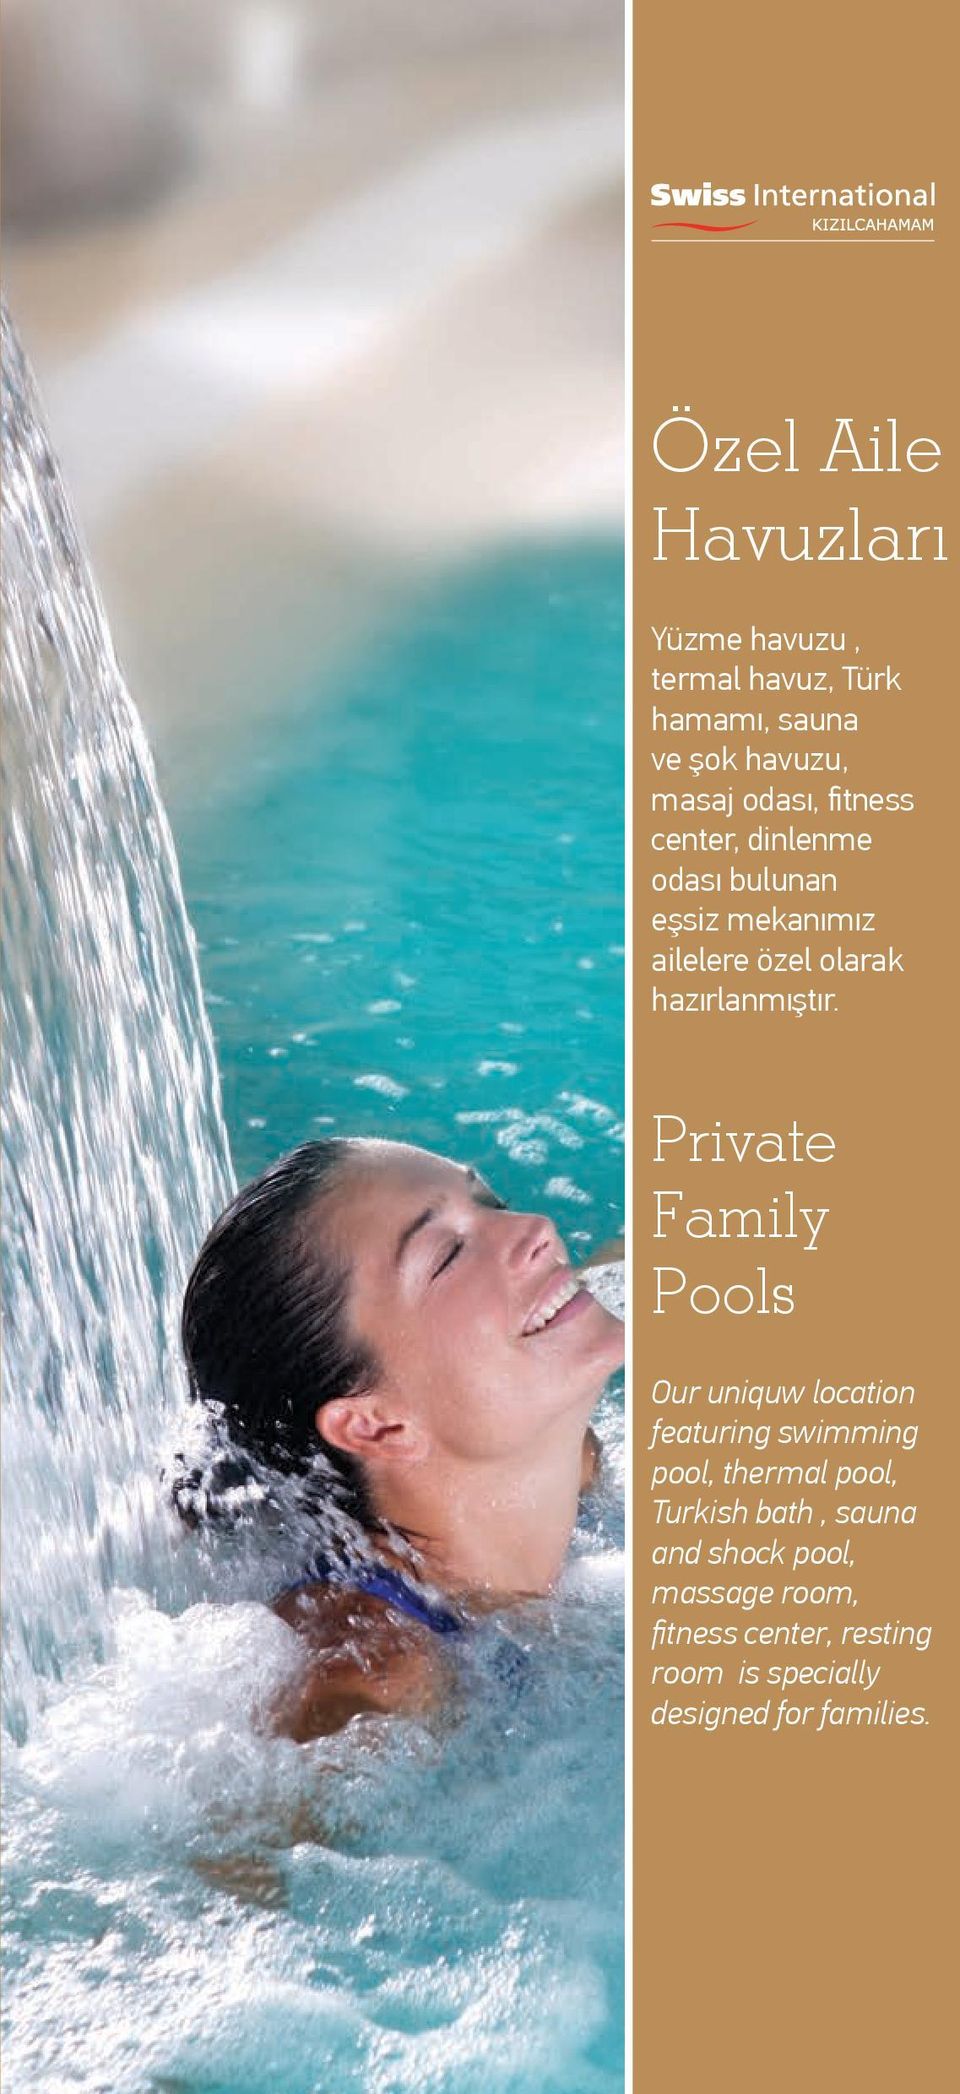 Private Family Pools Our uniquw location featuring swimming pool, thermal pool, Turkish bath,